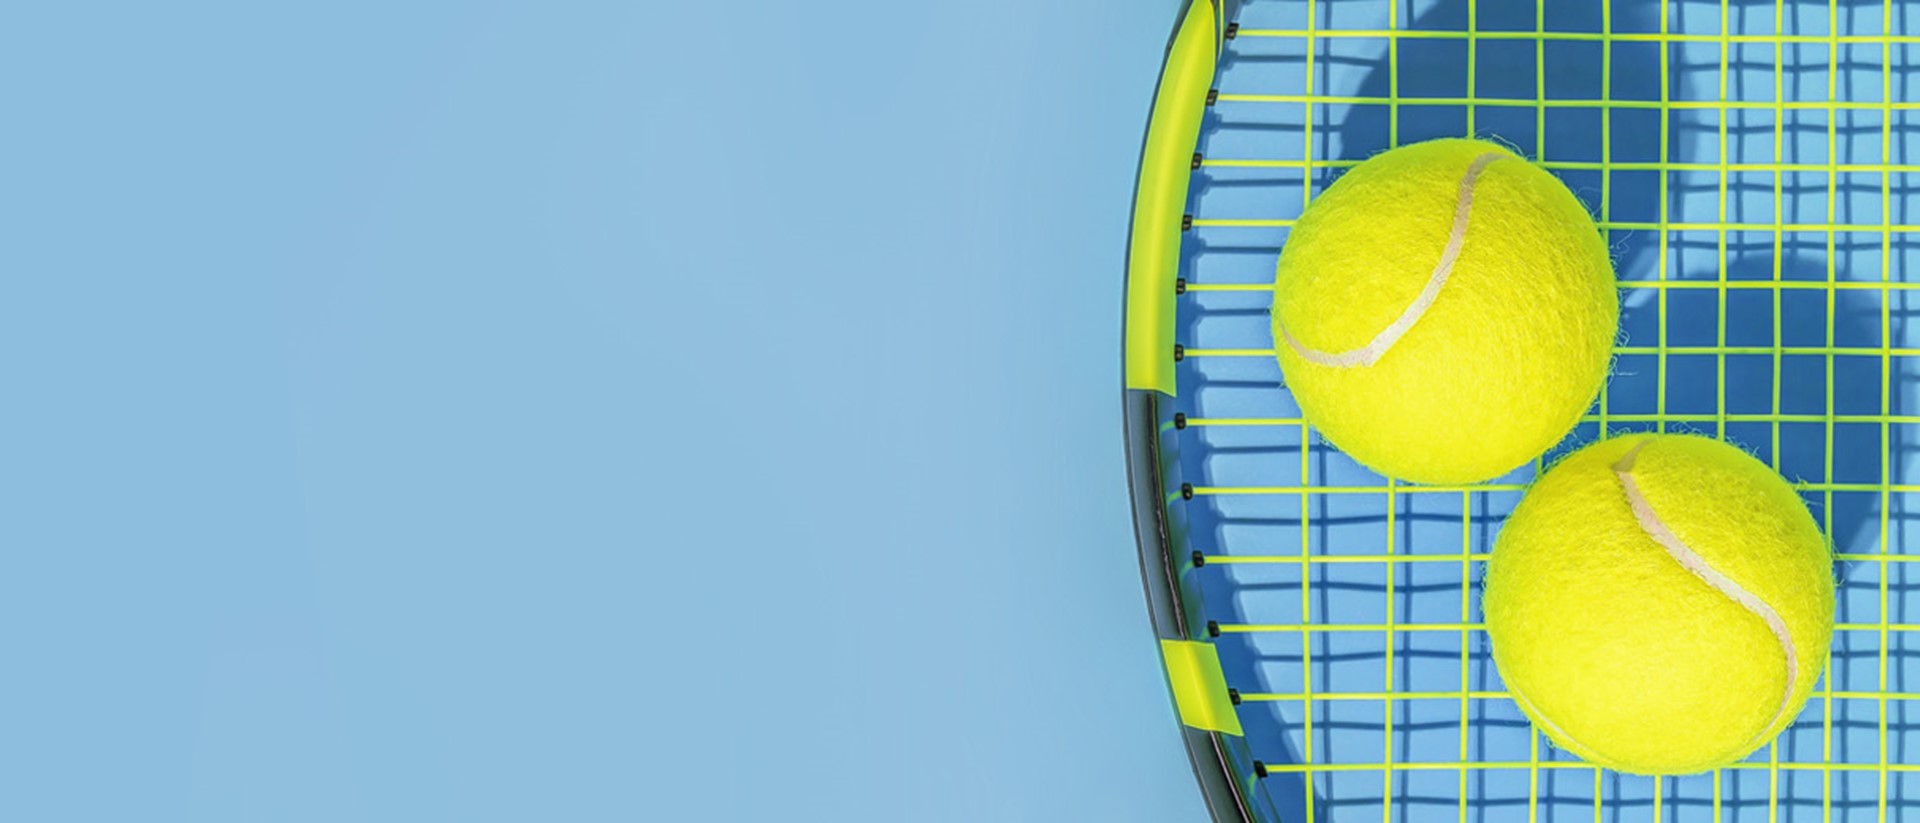 Image of two tennis balls on a tennis racket against a blue background